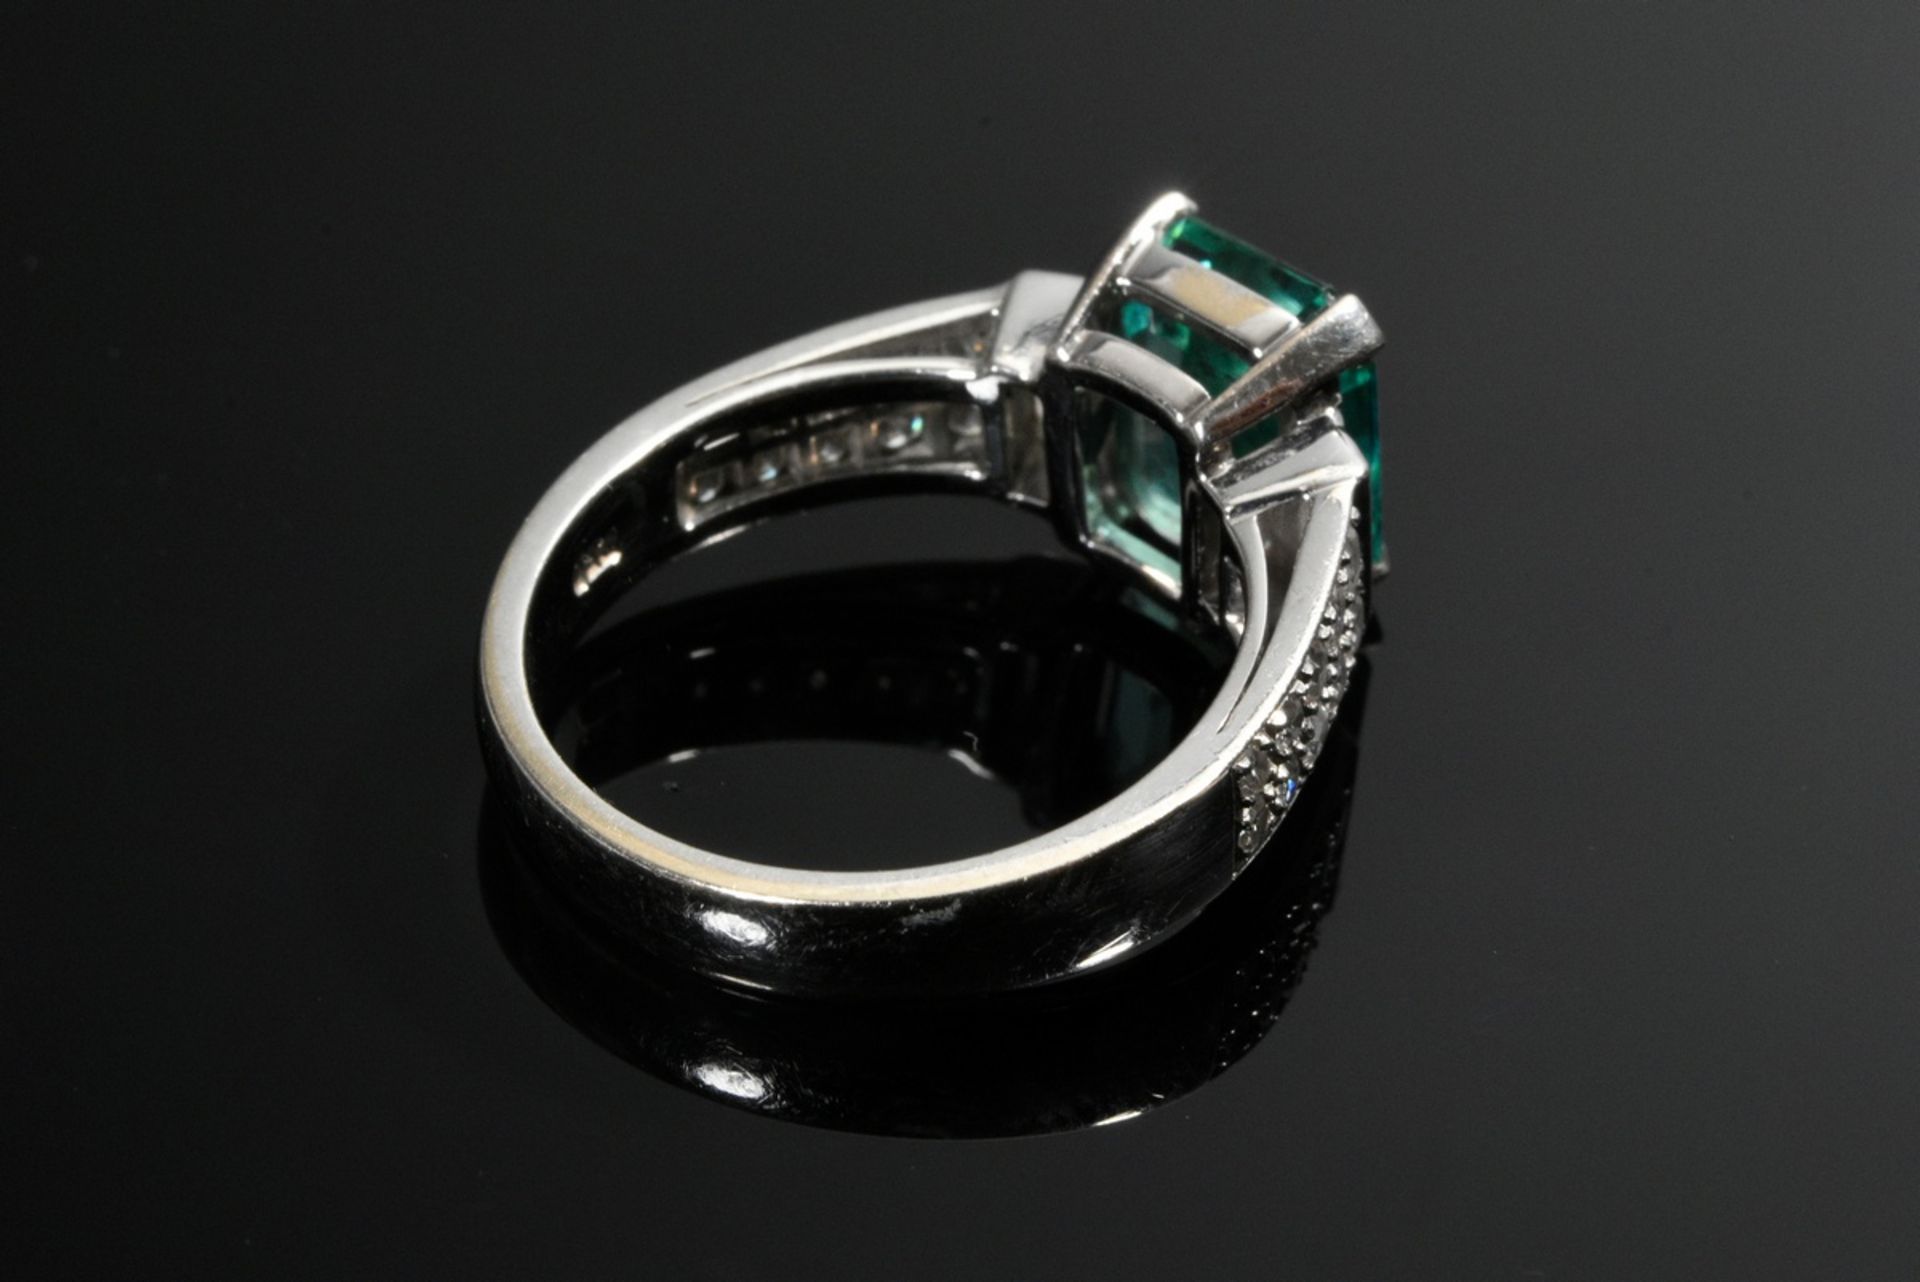 White gold 750 ring with emerald-cut tourmaline (approx. 2.70ct) and brilliant- and baguette-cut di - Image 4 of 4